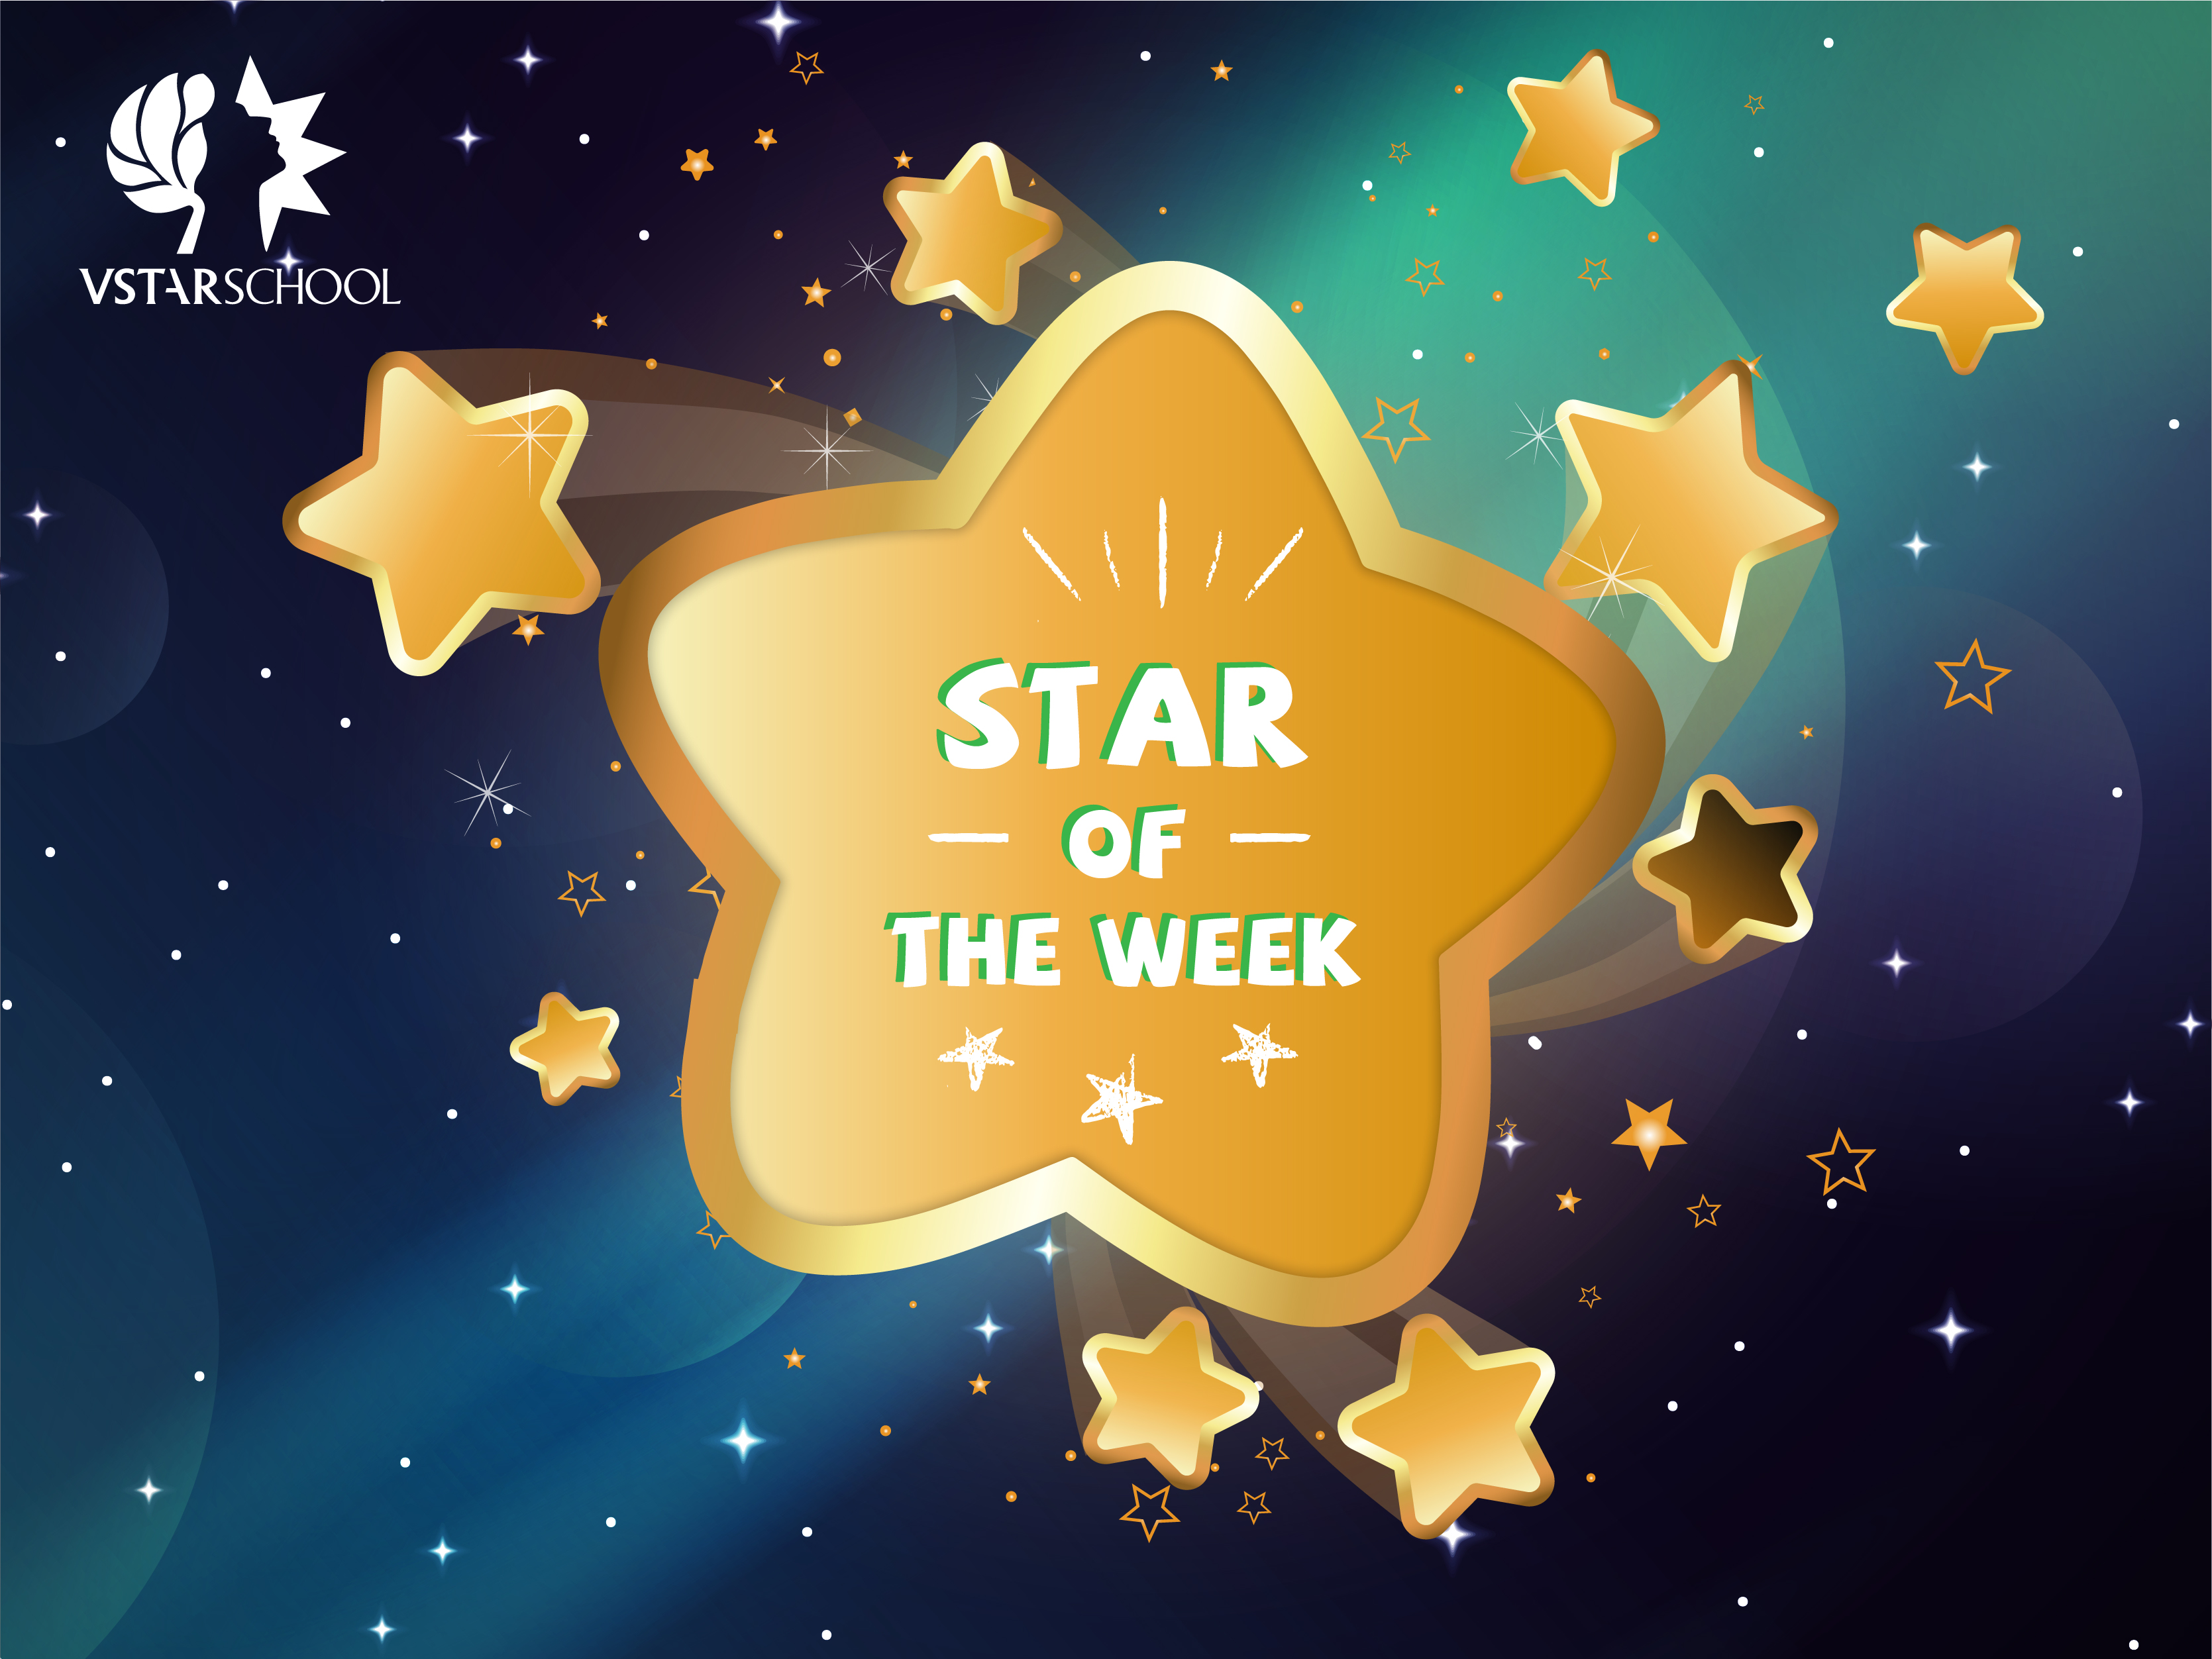 STAR OF THE WEEK TUẦN 4 - 10/2018